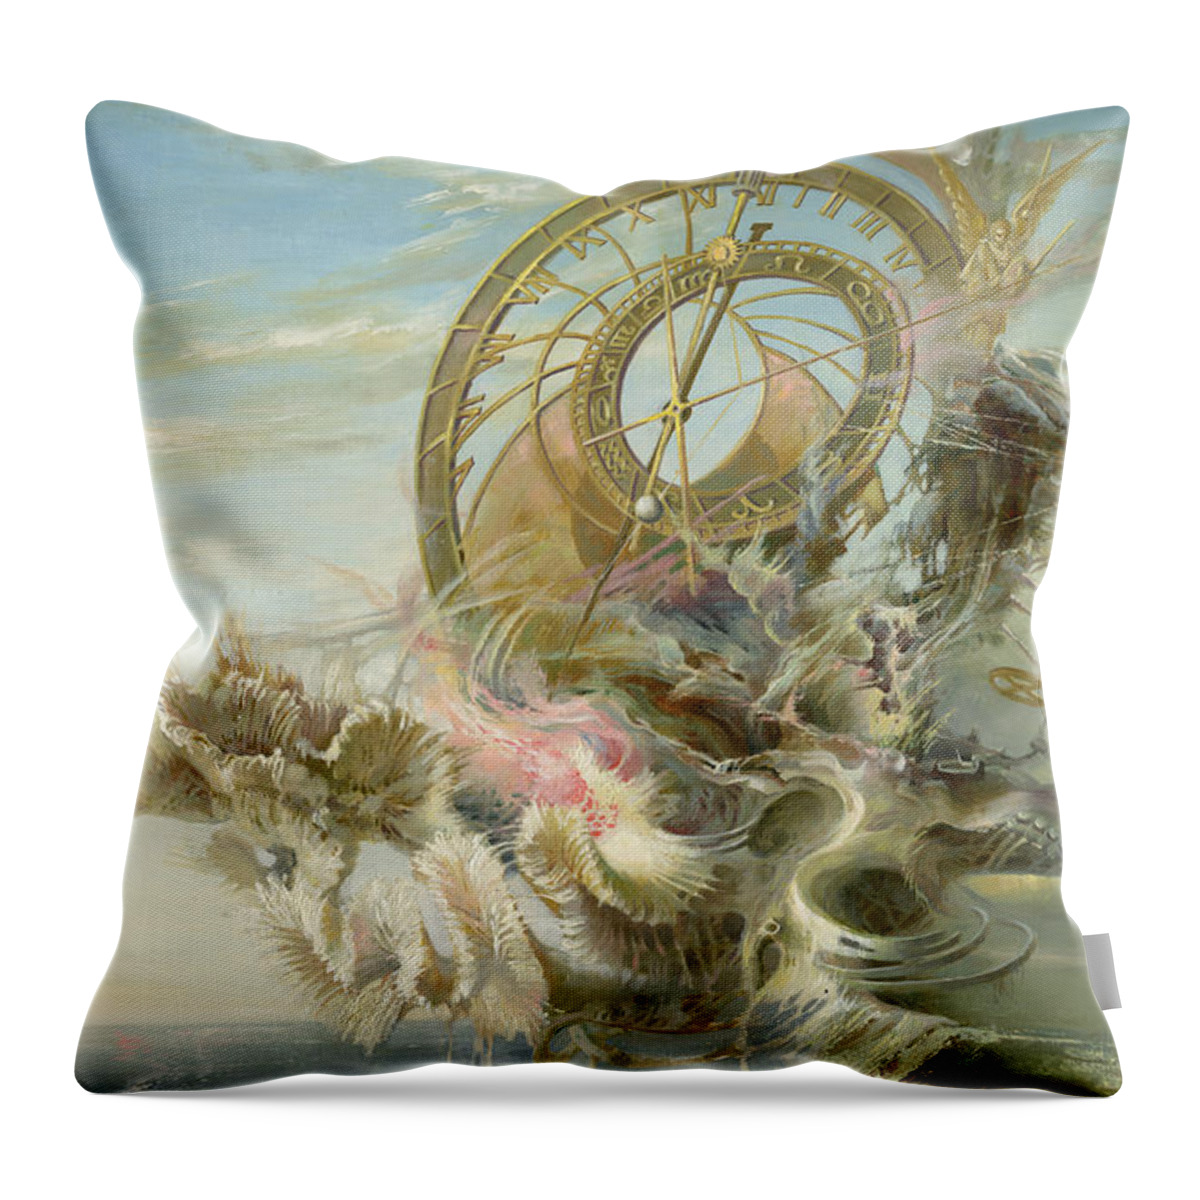 Sergey Gusarin Throw Pillow featuring the painting Spiral of Time by Sergey Gusarin